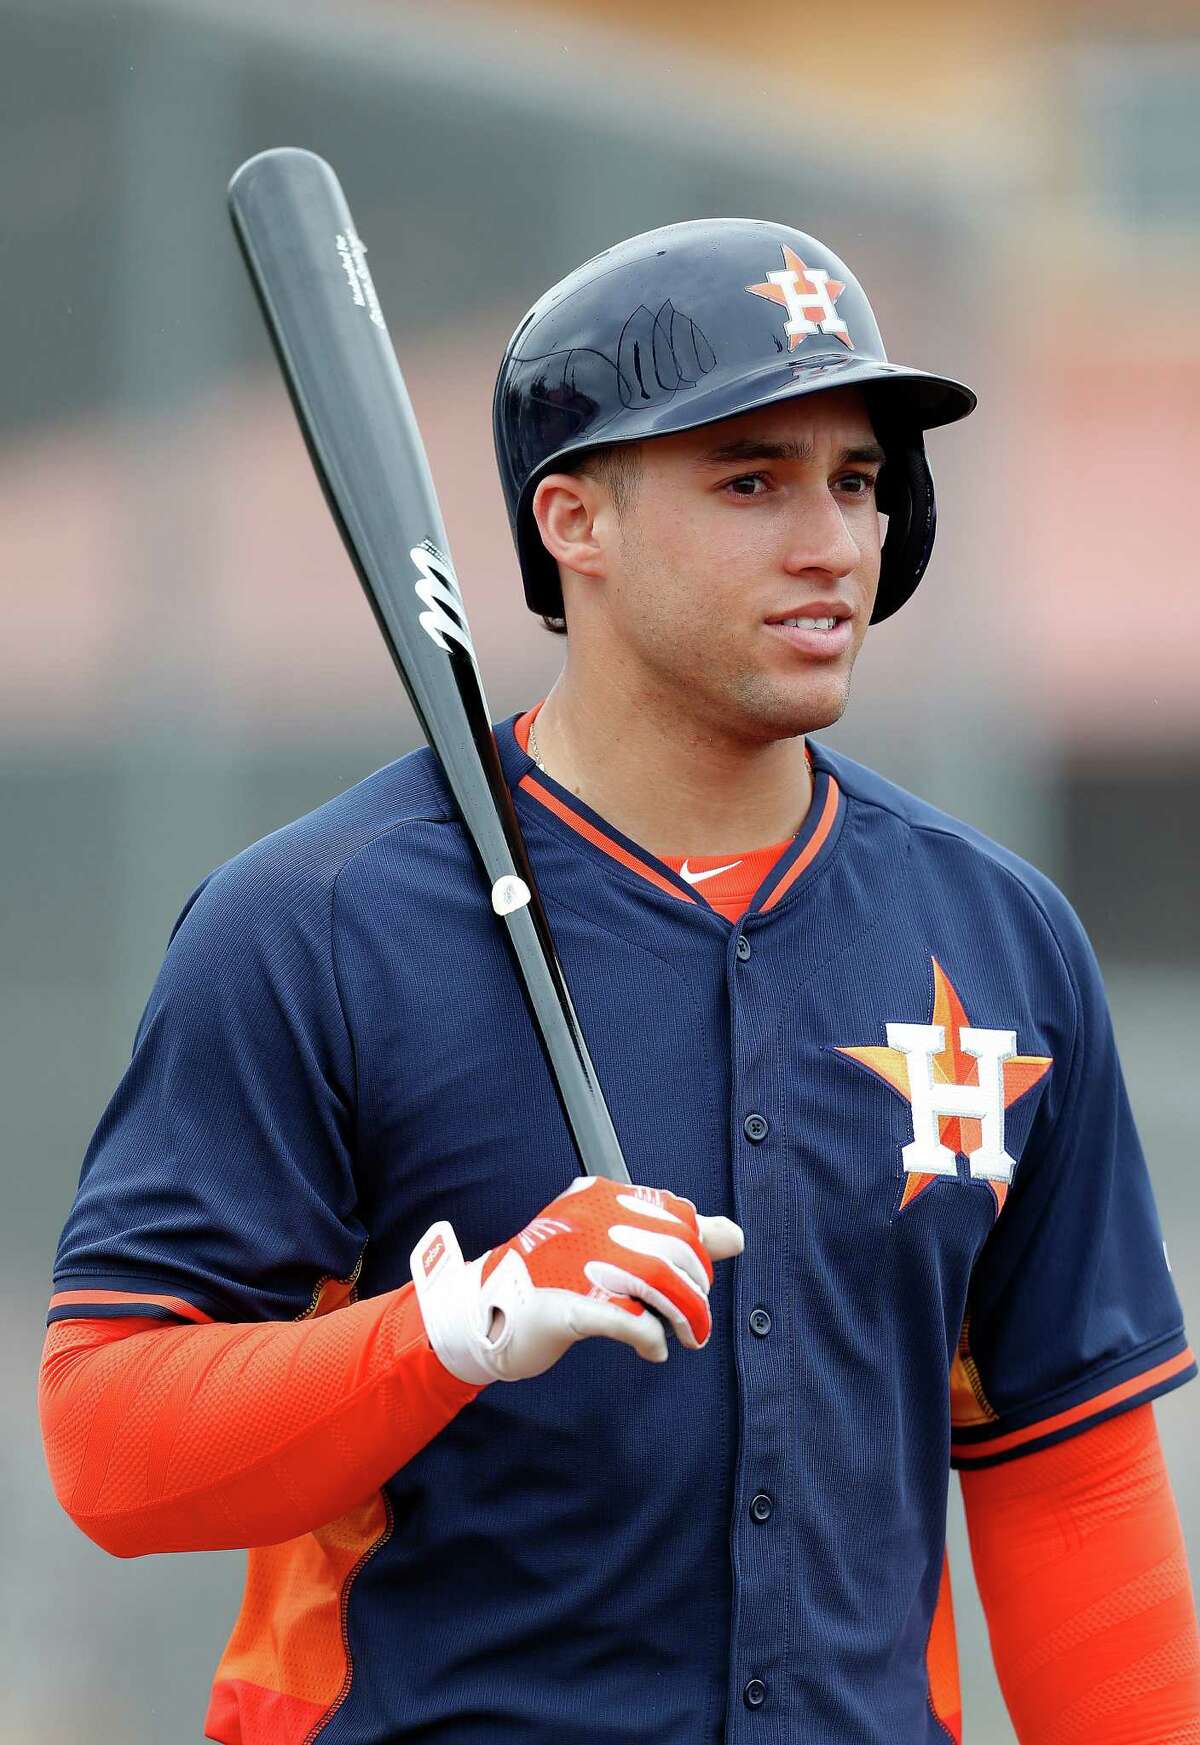 Outfielder George Springer's rookie season came to an end in mid-July because of a left quad strain.